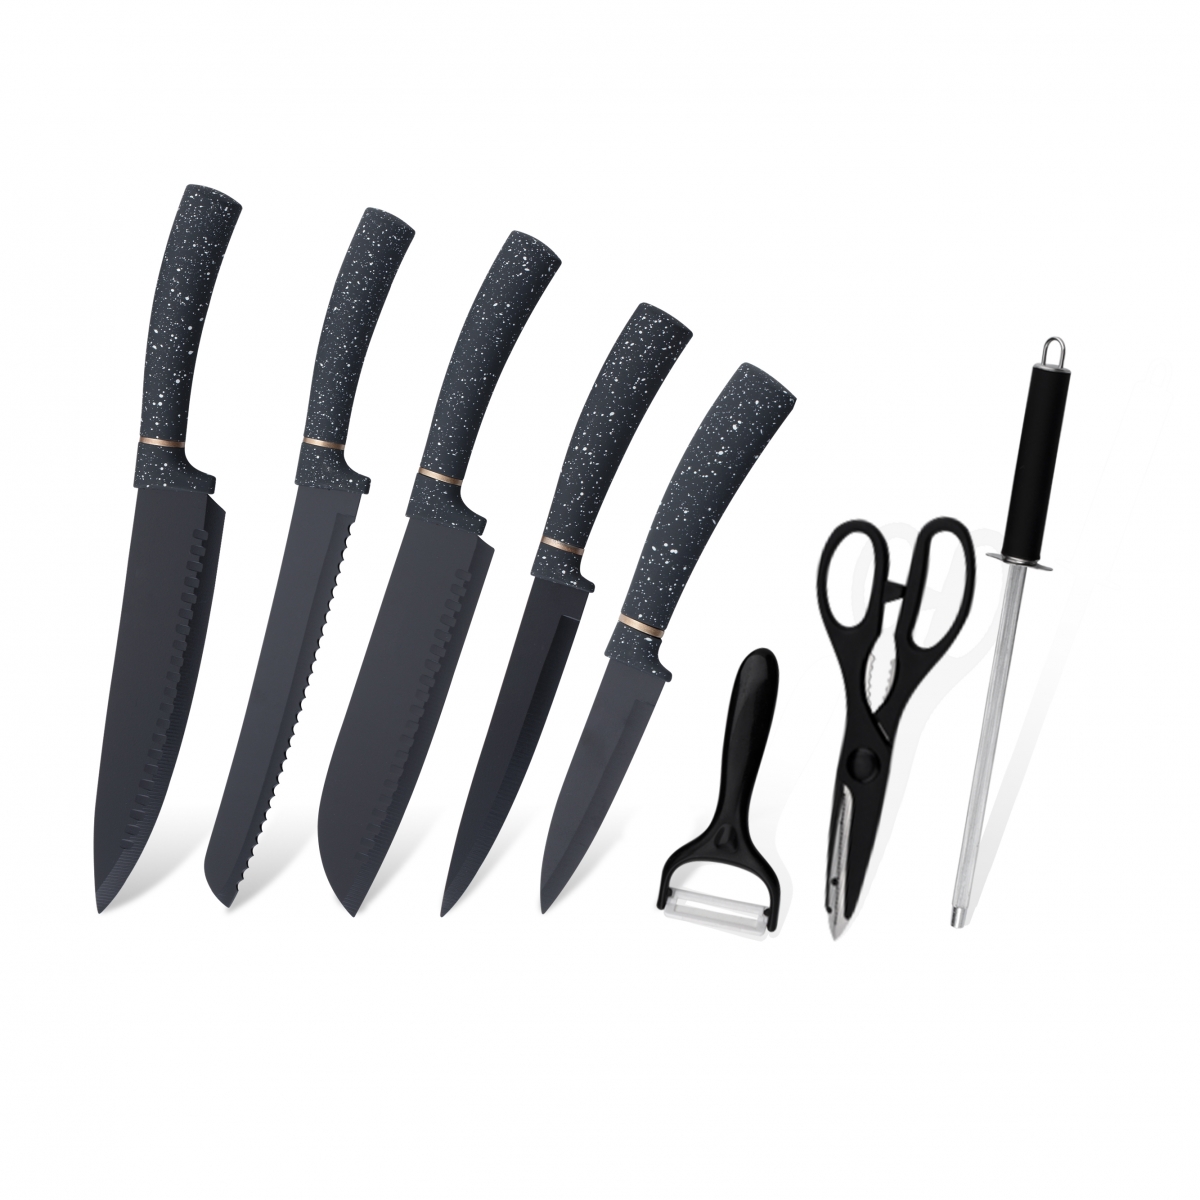 Why is it necessary to confirm the non stick knives factory,colored knife set factory,Kitchen Knife OEM factory’s sample before place order-ZX | kitchen knife,Kitchen tools,Silicone Cake Mould,Cutting Board,Baking Tool Sets,Chef Knife,Steak Knife,Slicer knife,Utility Knife,Paring Knife,Knife block,Knife Stand,Santoku Knife,toddler Knife,Plastic Knife,Non Stick Painting Knife,Colorful Knife,Stainless Steel Knife,Can opener,bottle Opener,Tea Strainer,Grater,Egg Beater,Nylon Kitchen tool,Silicone Kitchen Tool,Cookie Cutter,Cooking Knife Set,Knife Sharpener,Peeler,Cake Knife,Cheese Knife,Pizza Knife,Silicone Spatular,Silicone Spoon,Food Tong,Forged knife,Kitchen Scissors,cake baking knives,Children’s Cooking knives,Carving Knife